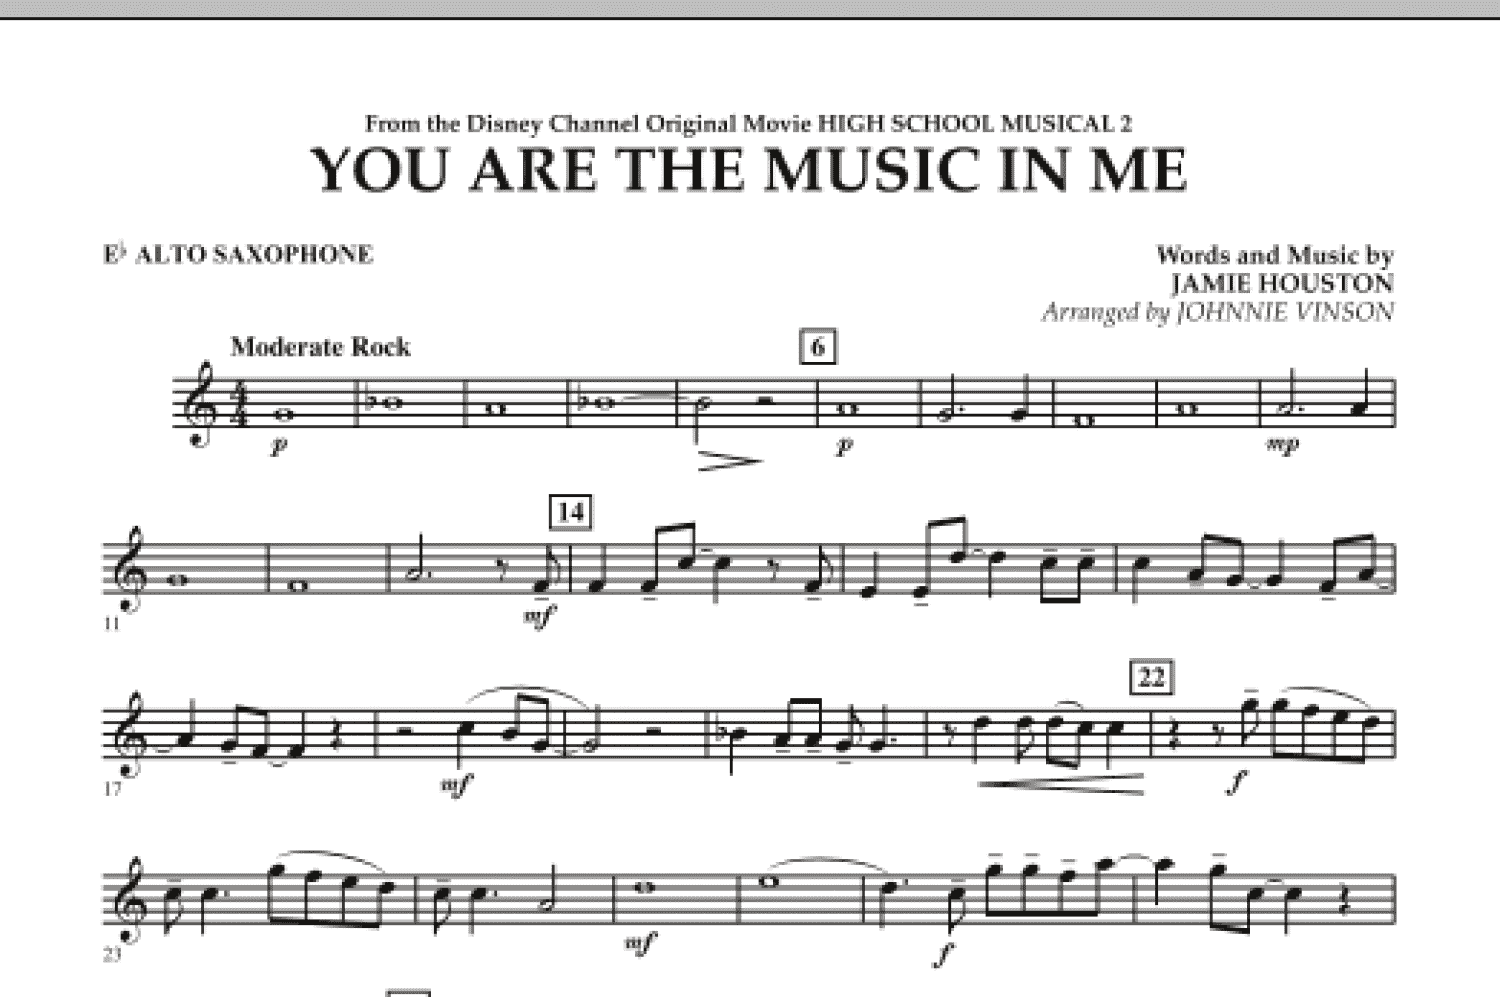 You Are The Music In Me (from High School Musical 2) - Eb Alto Saxophone (Concert Band)